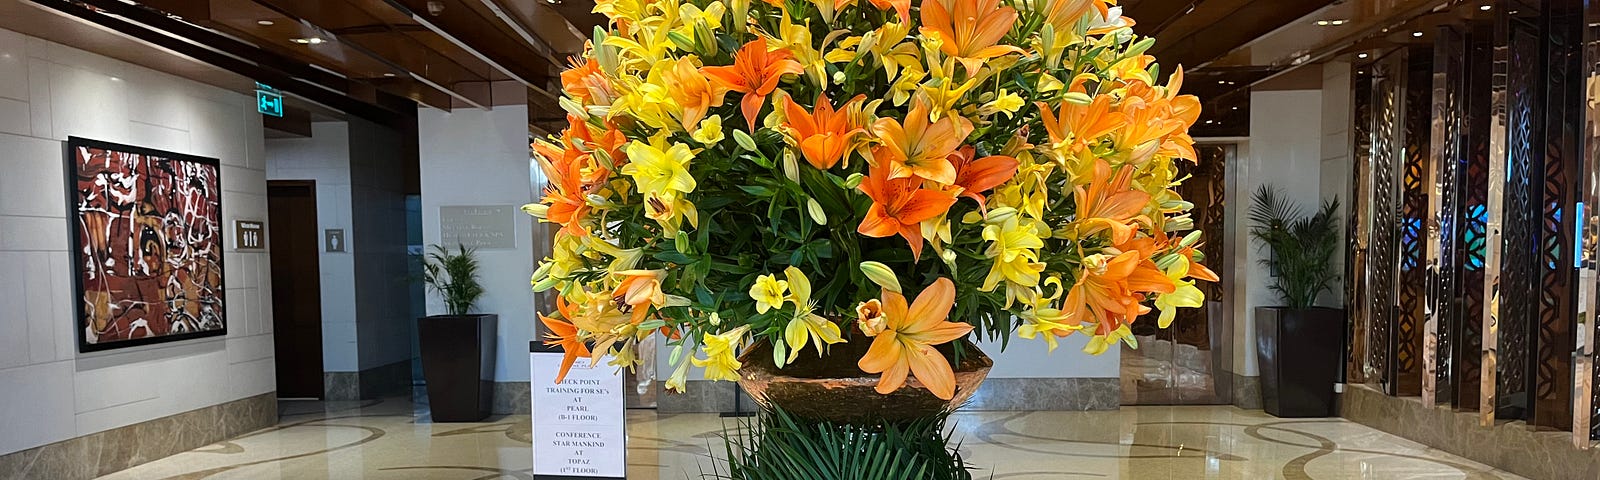 Lobby of the hotel, with yellow flowers.